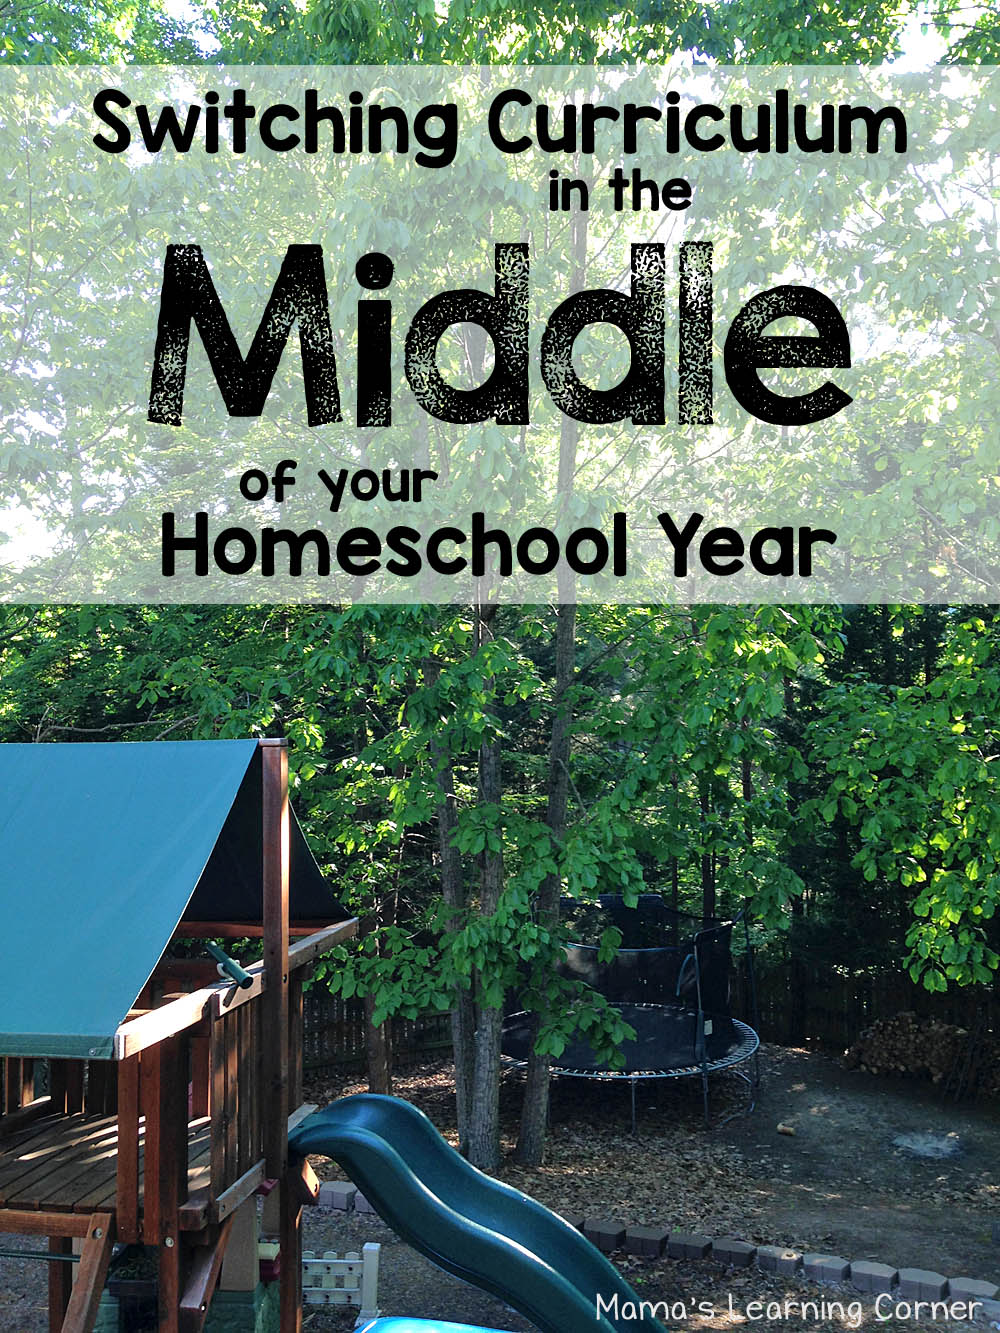 Switching Curriculum in the Middle of Your Homeschool Year